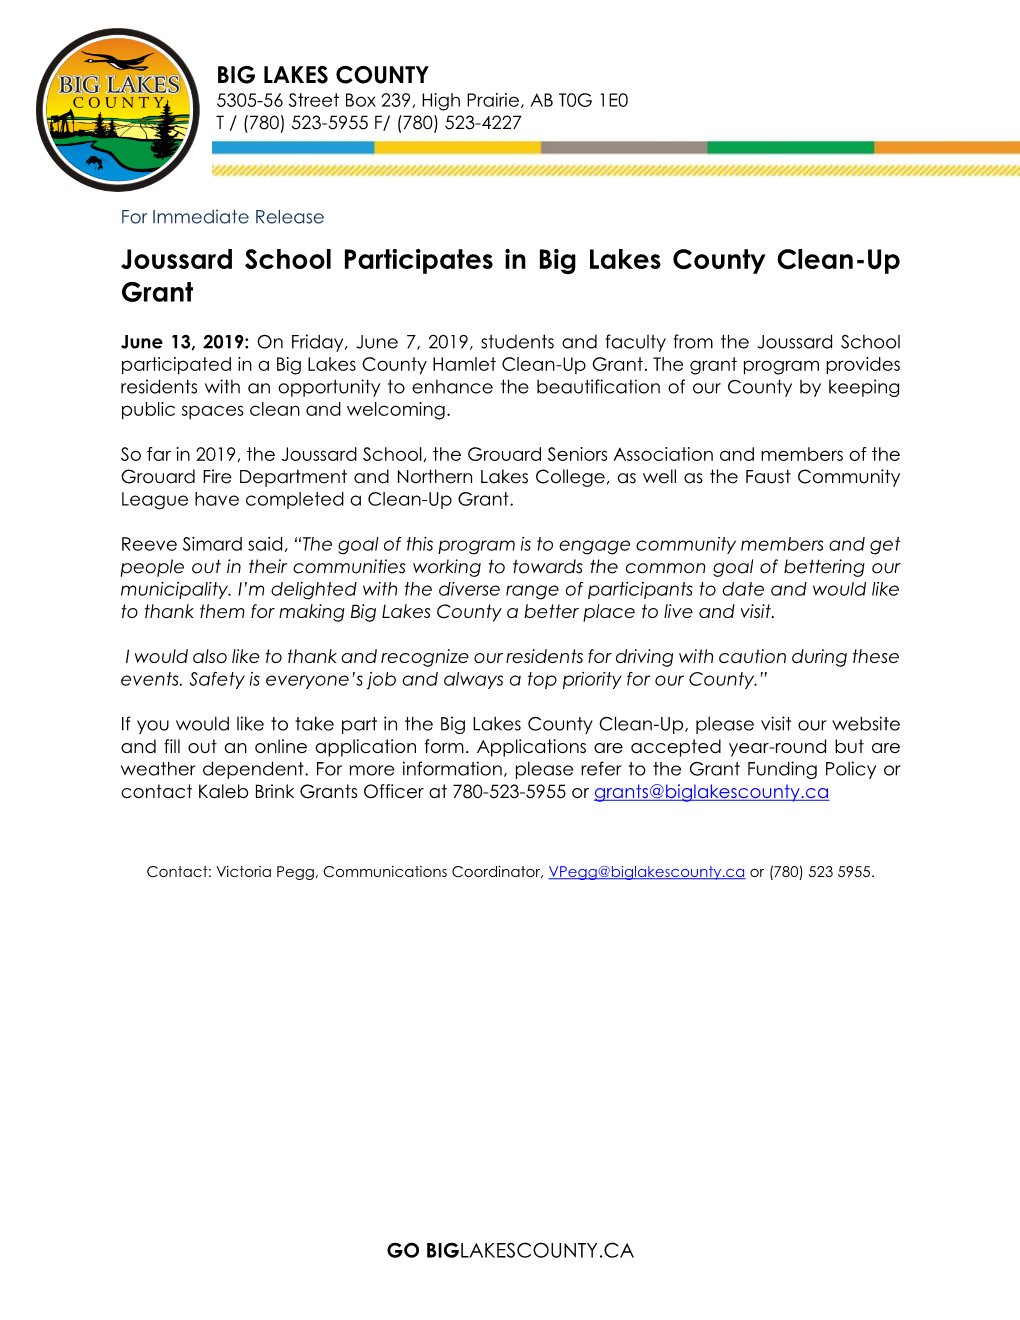 Joussard School Participates in Big Lakes County Clean-Up Grant